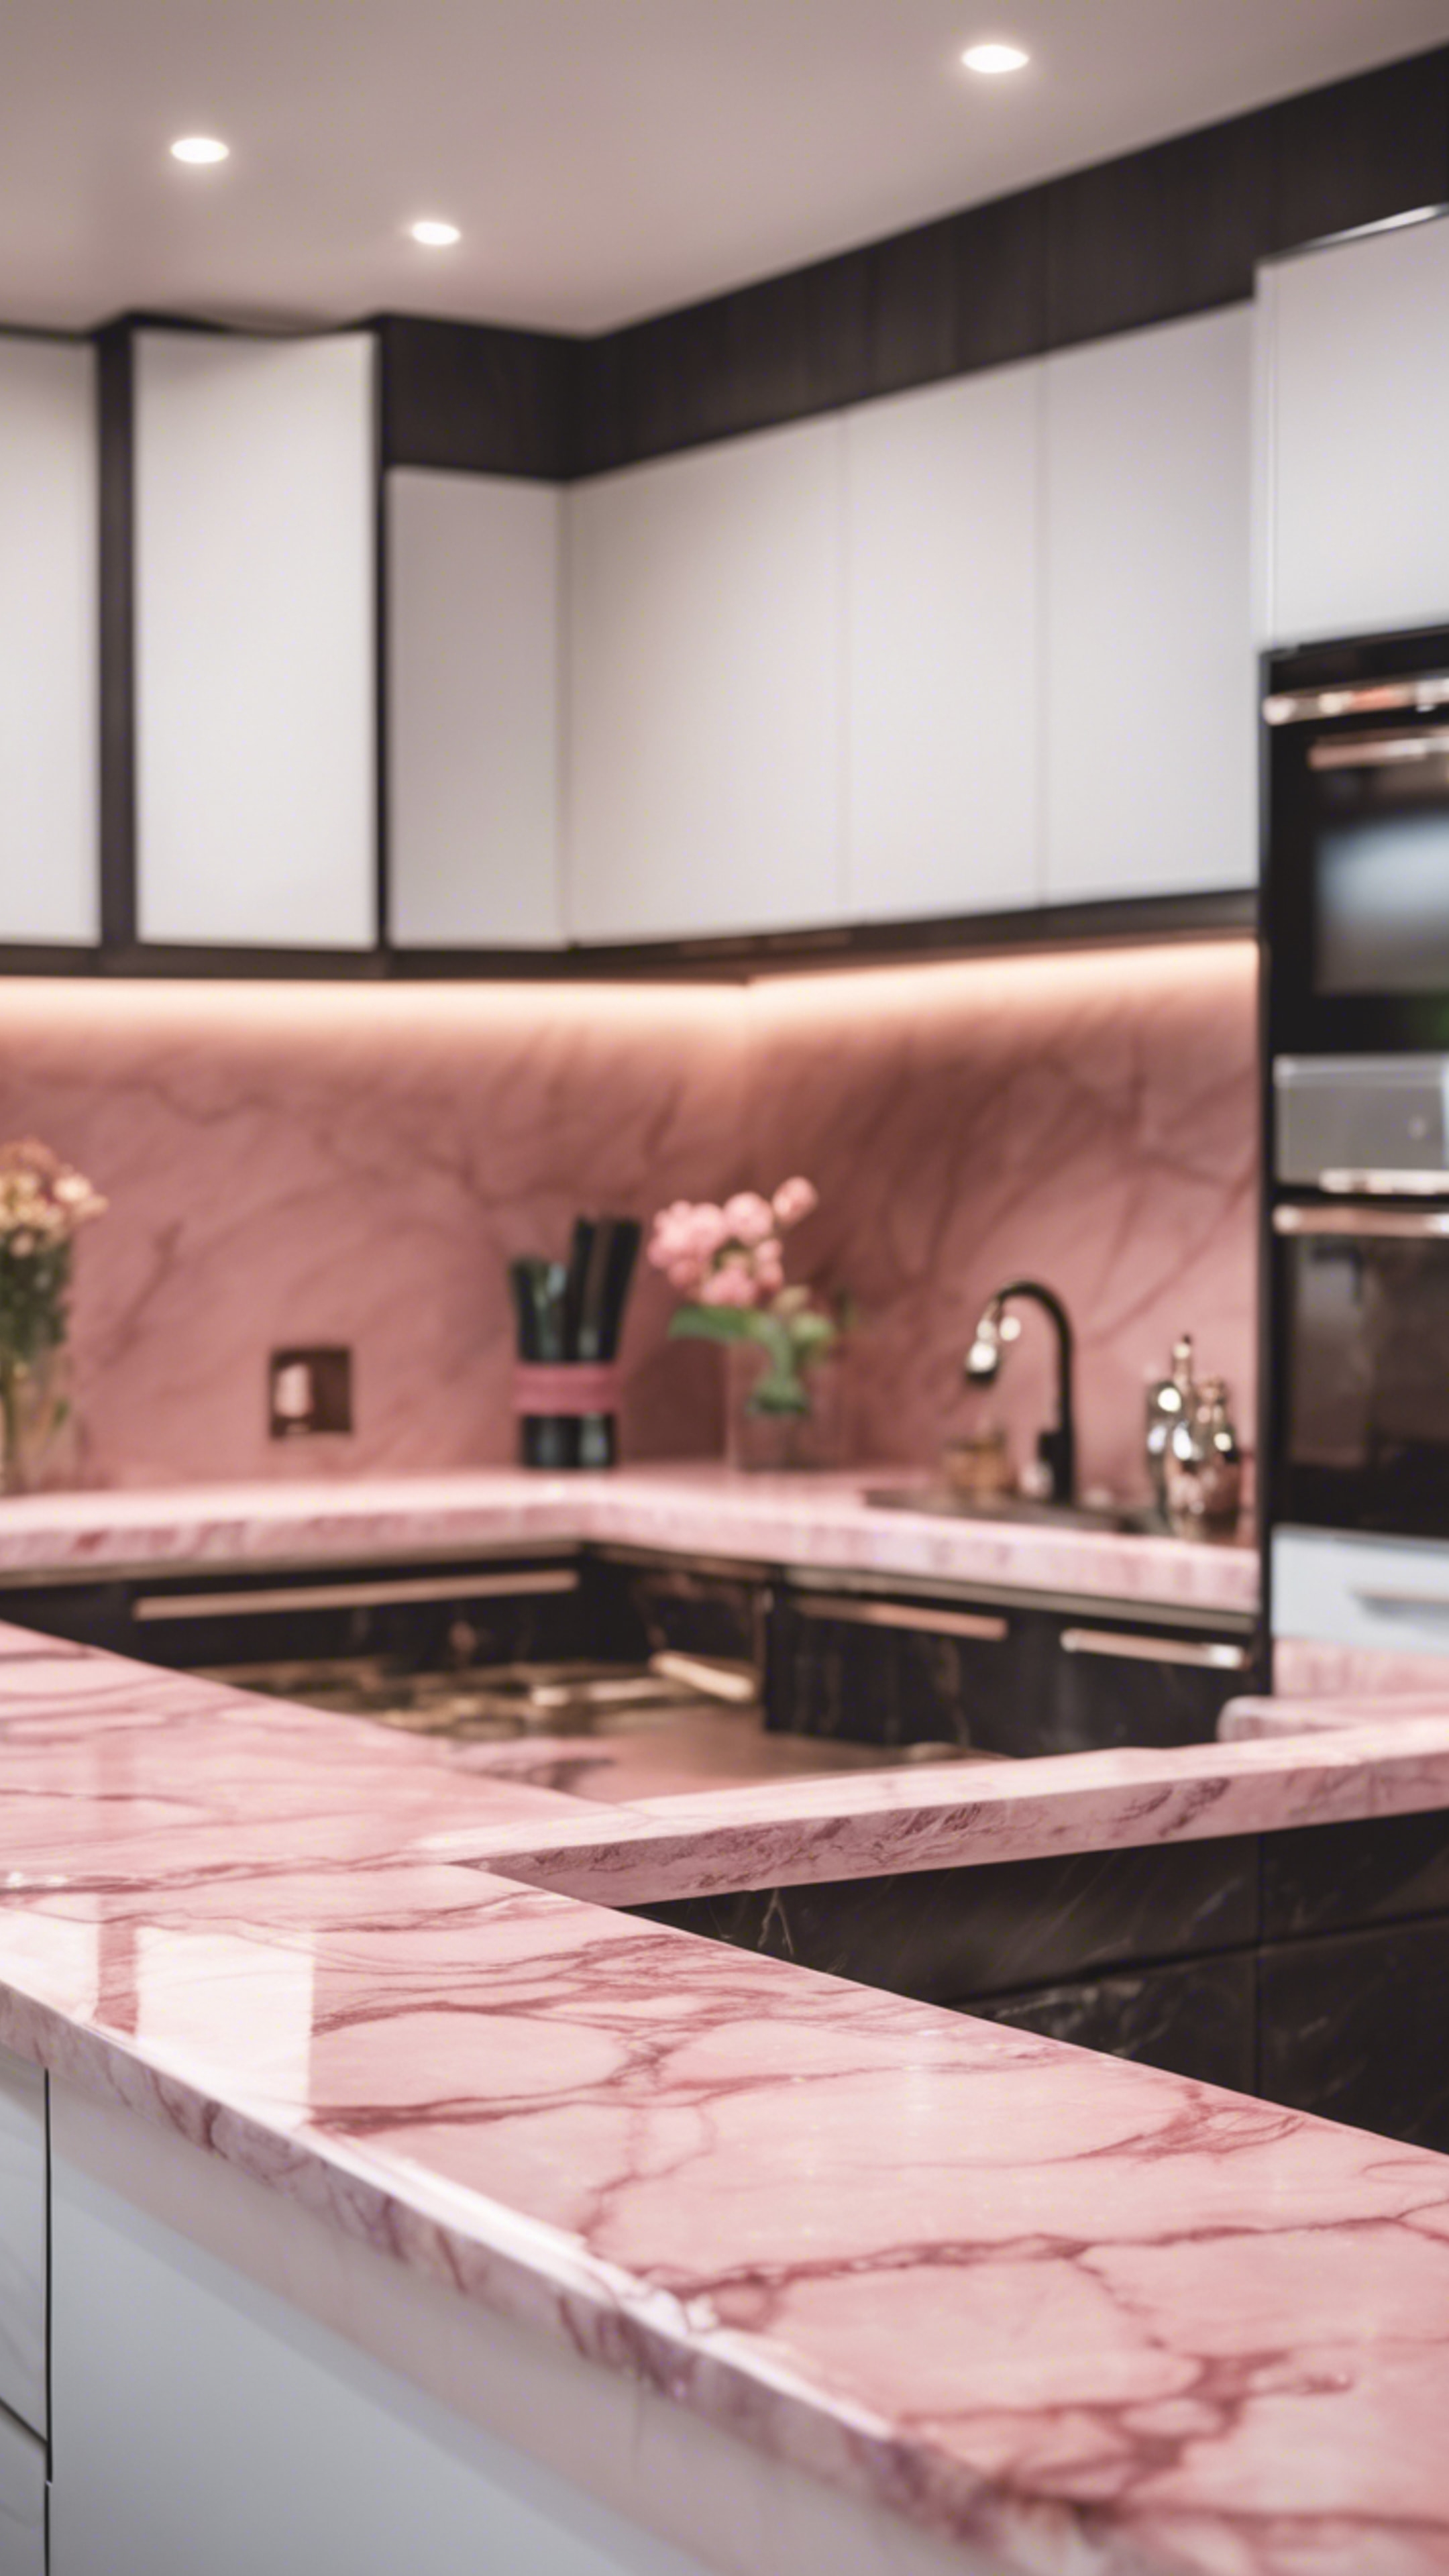 A rosy pink marble countertop sparkling in a modern kitchen. Валлпапер[be2142cfde9545daae7b]